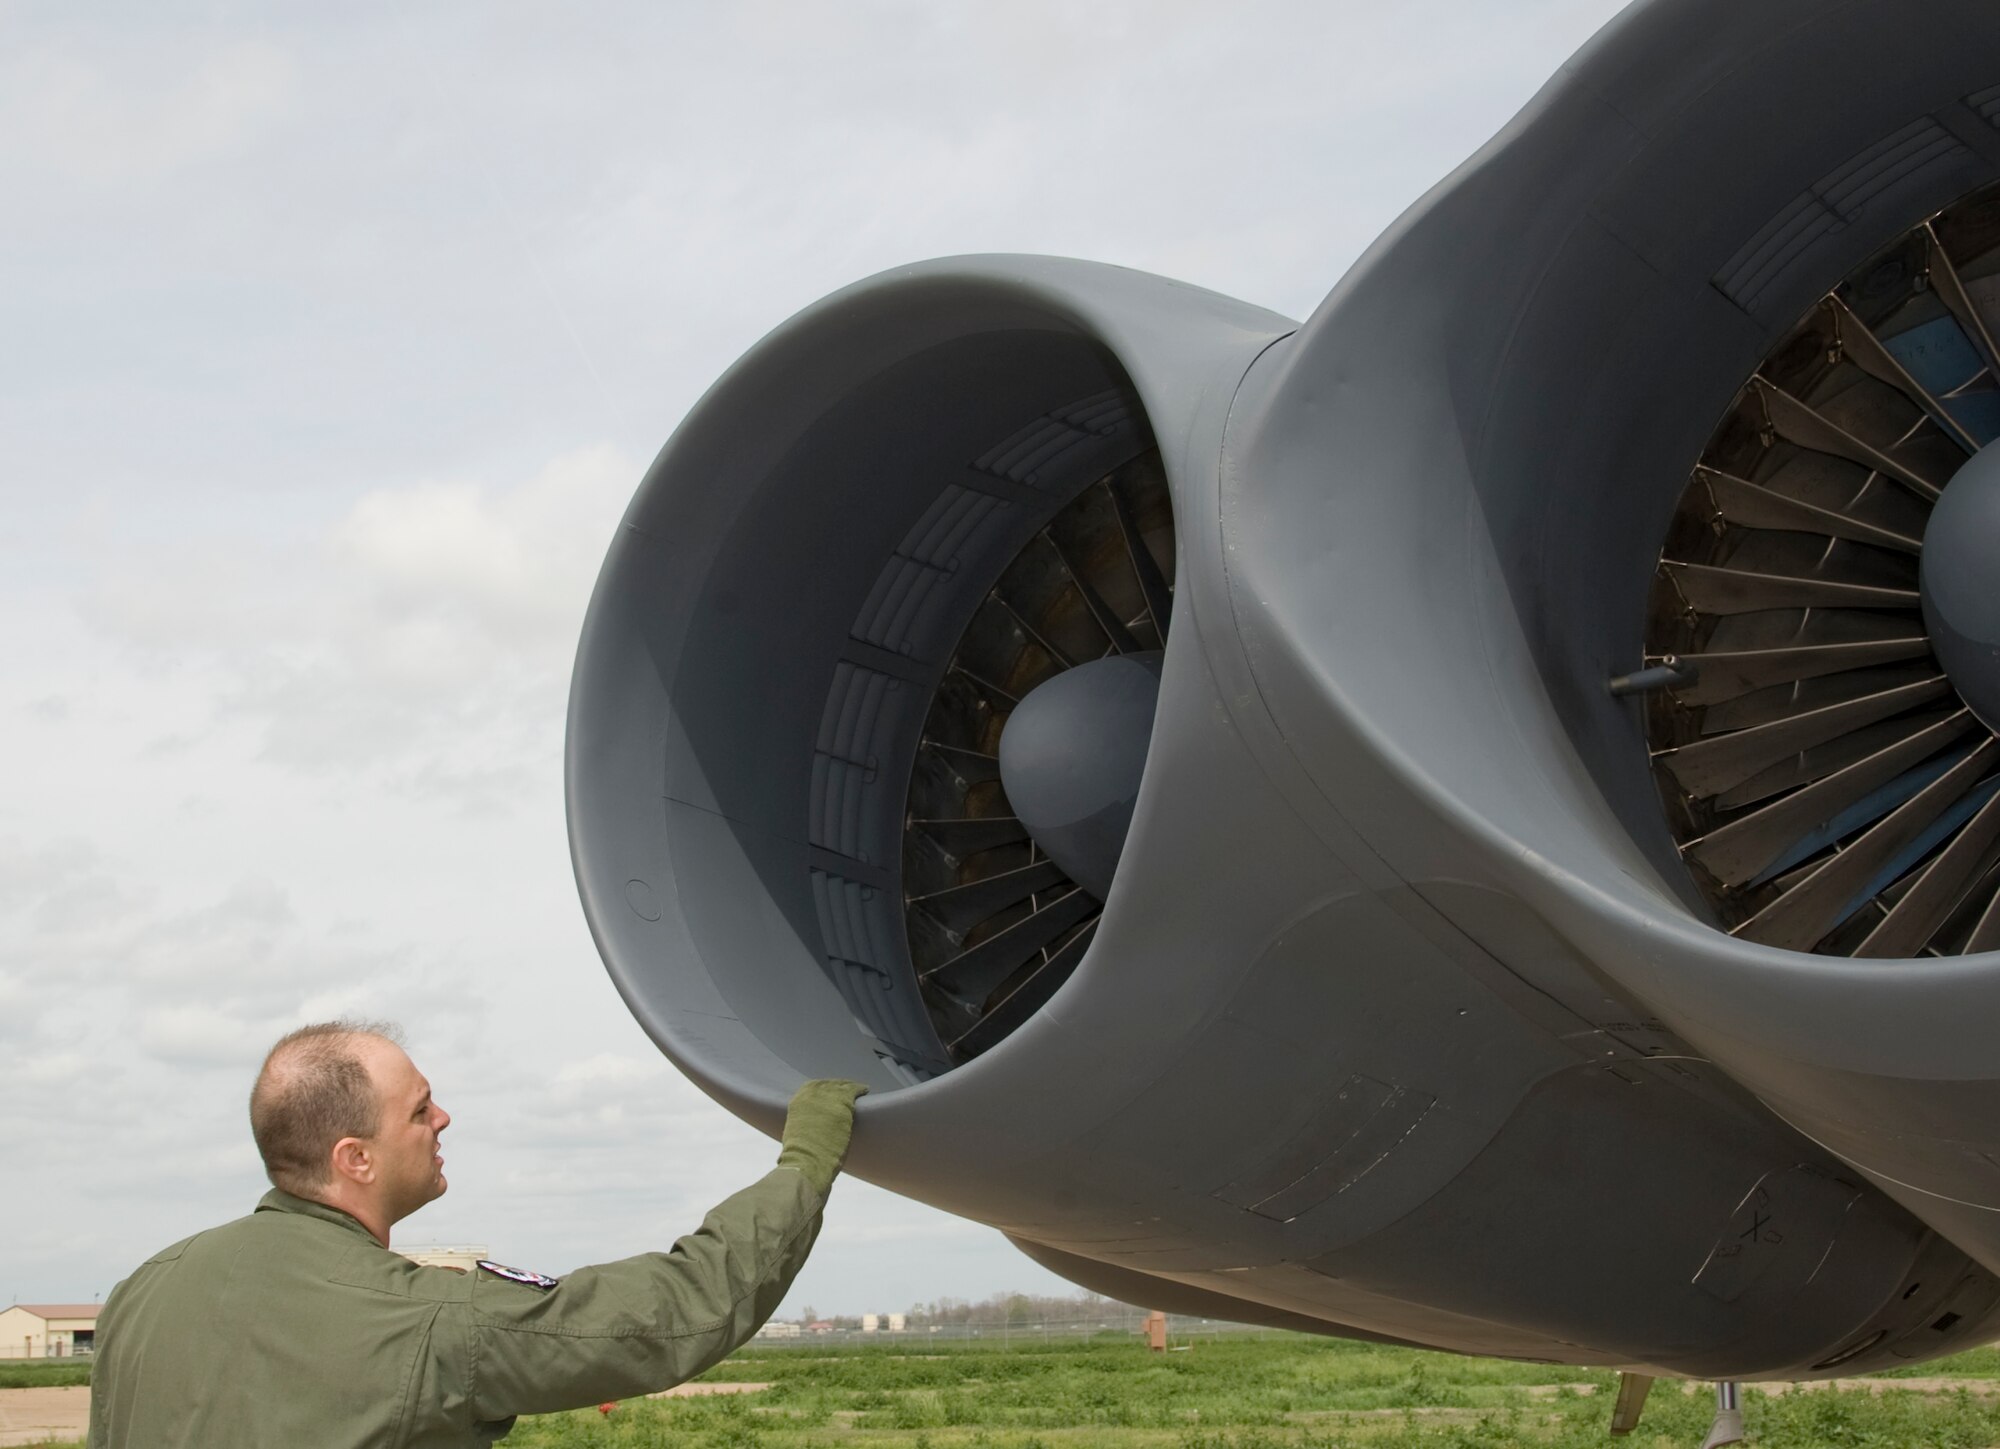 Maj. Brian Sealock, 20th Bomb Squadron, inspects an engine of a B-52H Stratofortress on Barksdale Air Force Base, La., March 13. Each member of the aircrew has his or her own specific items of interest they look at as they conduct an aircraft inspection before takeoff. (U.S. Air Force photo/Airman 1st Class Benjamin Gonsier)(RELEASED)
